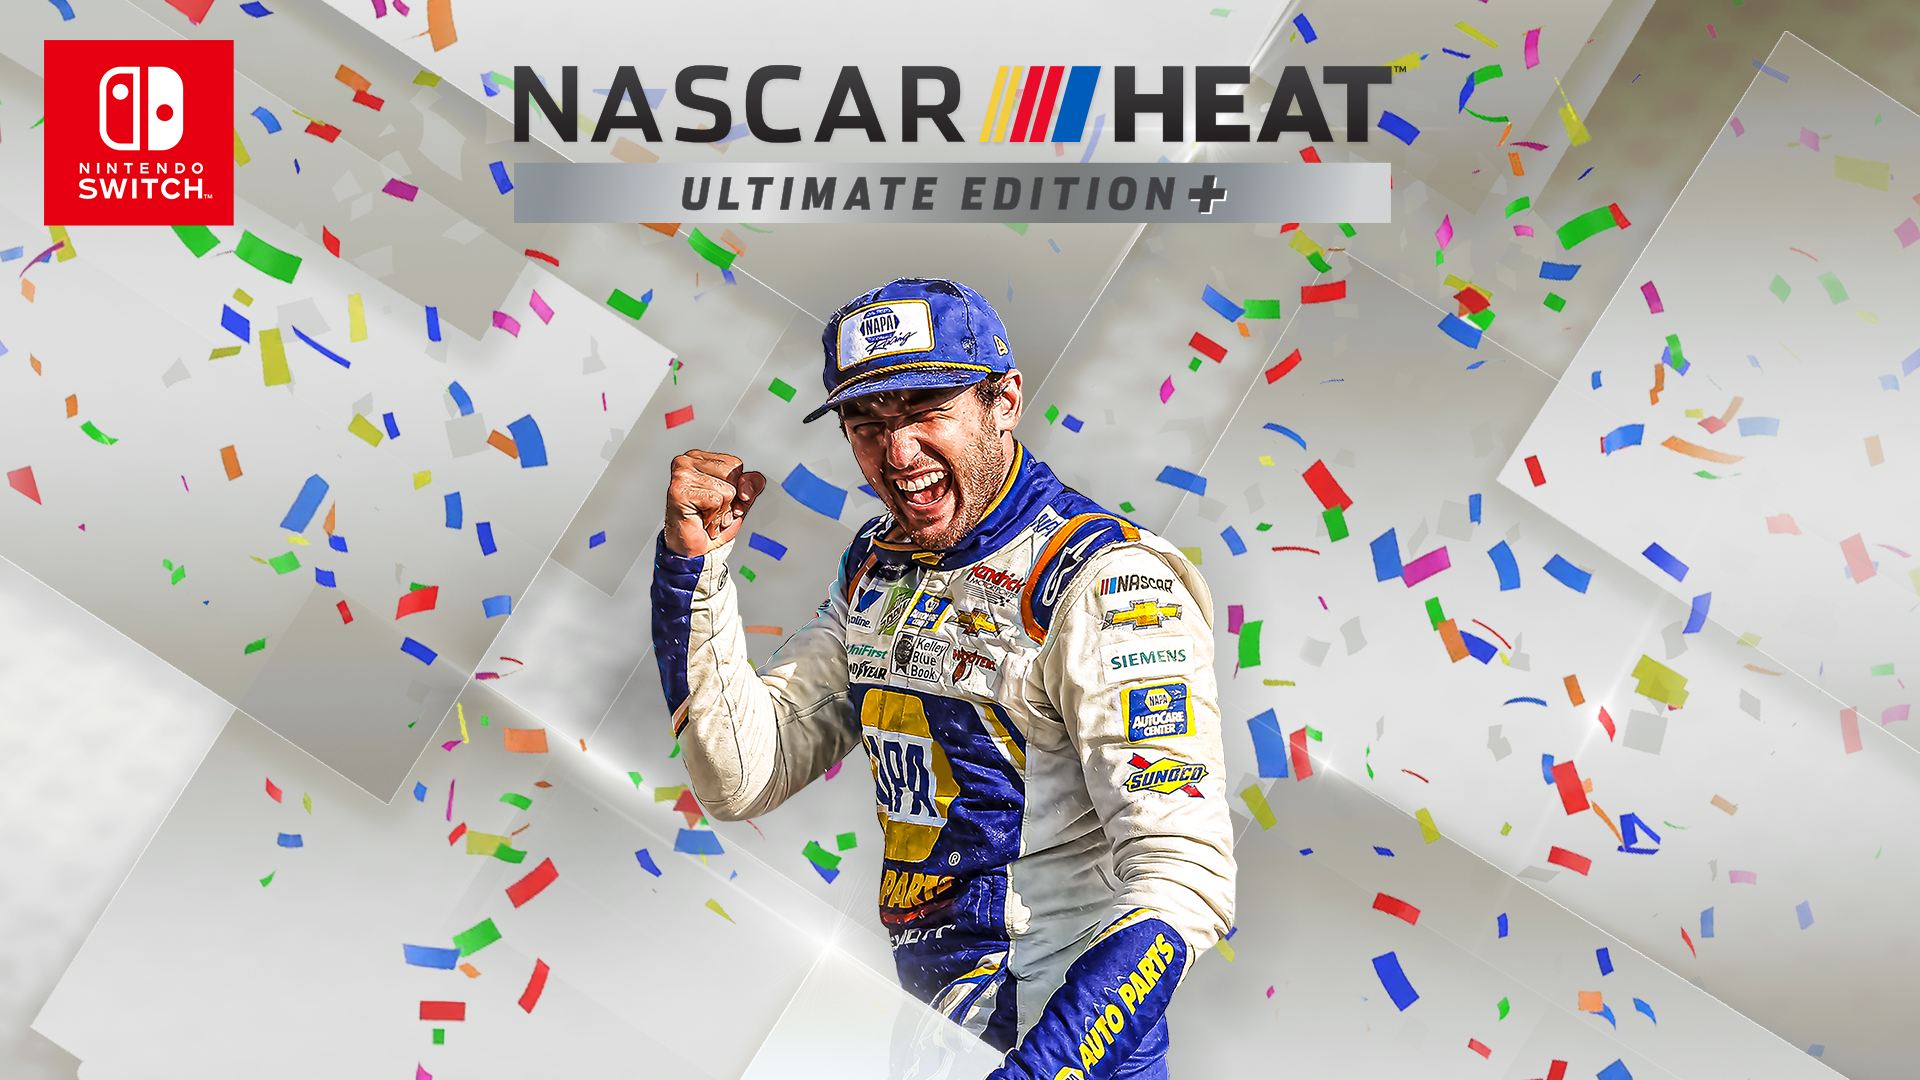 NASCAR Heat Ultimate Edition+ Comes to Nintendo Switch